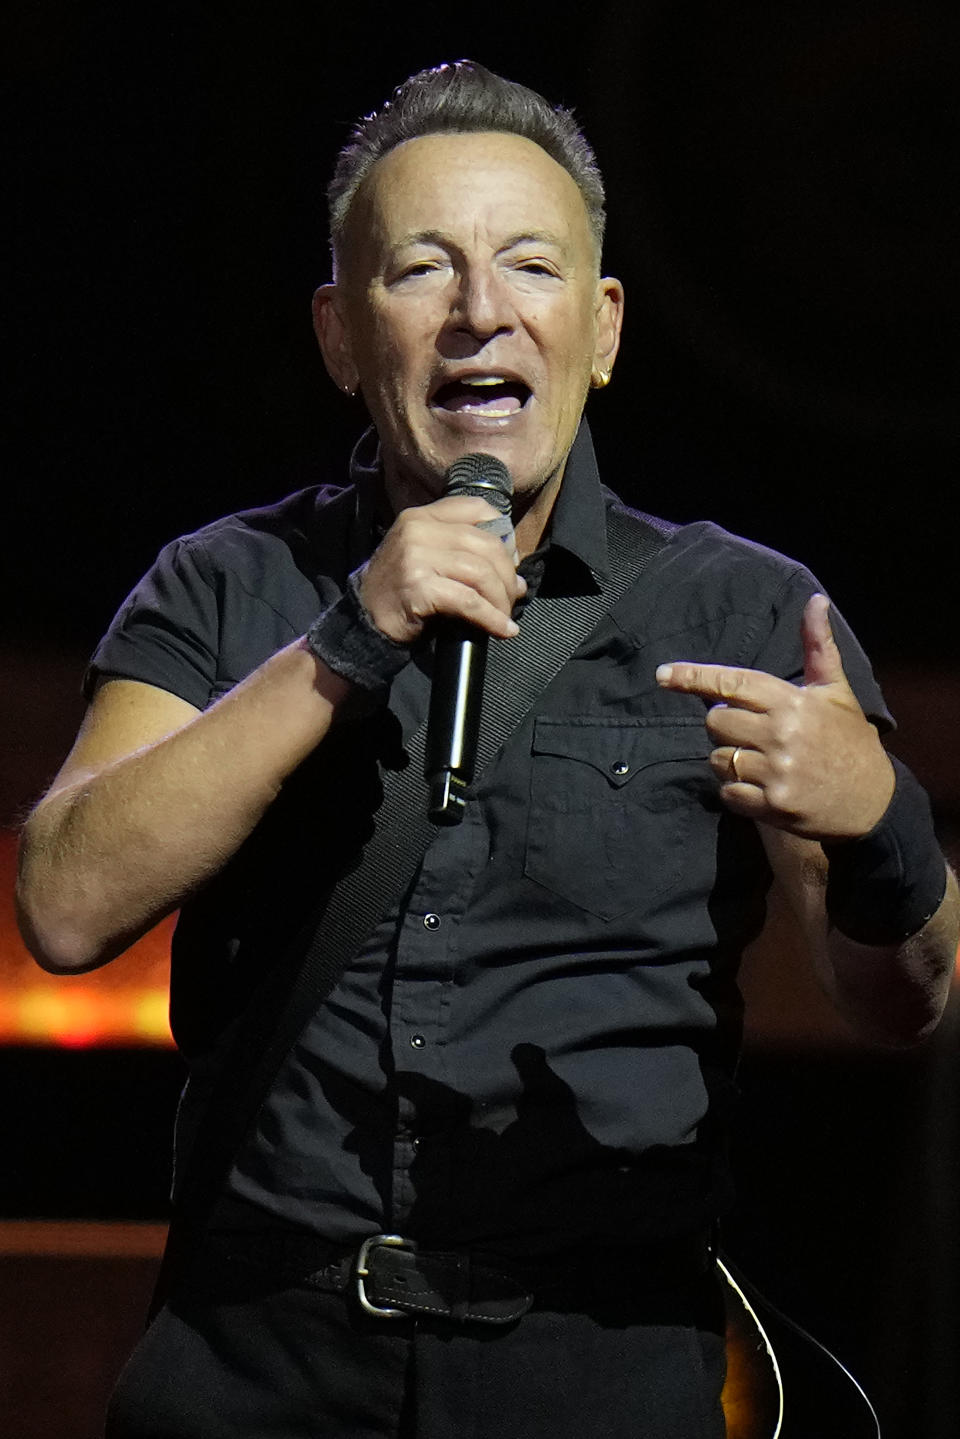 Singer Bruce Springsteen and the E Street Band perform during their 2023 tour Wednesday, Feb. 1, 2023, at Amalie Arena in Tampa, Fla. (AP Photo/Chris O'Meara)